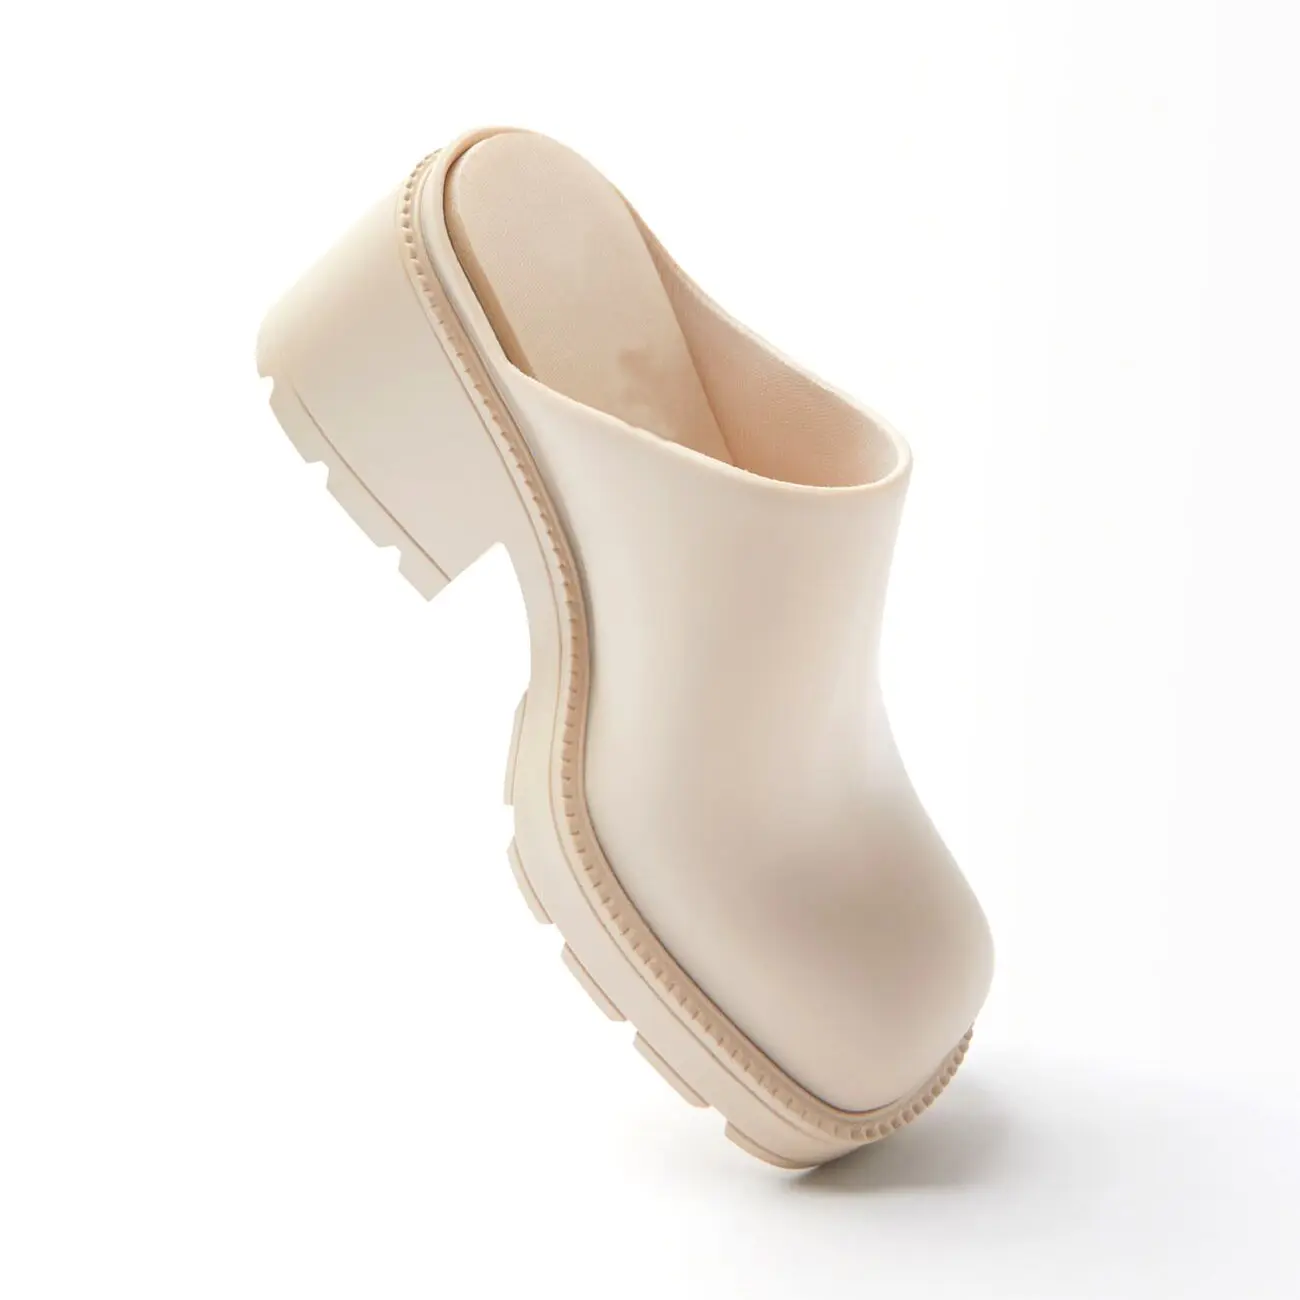 New Style All Match 6-10cm Block Heel Clogs Mules Sandal Women Beige White Comfortable Clog Slipper Sandal Shoes for Lady